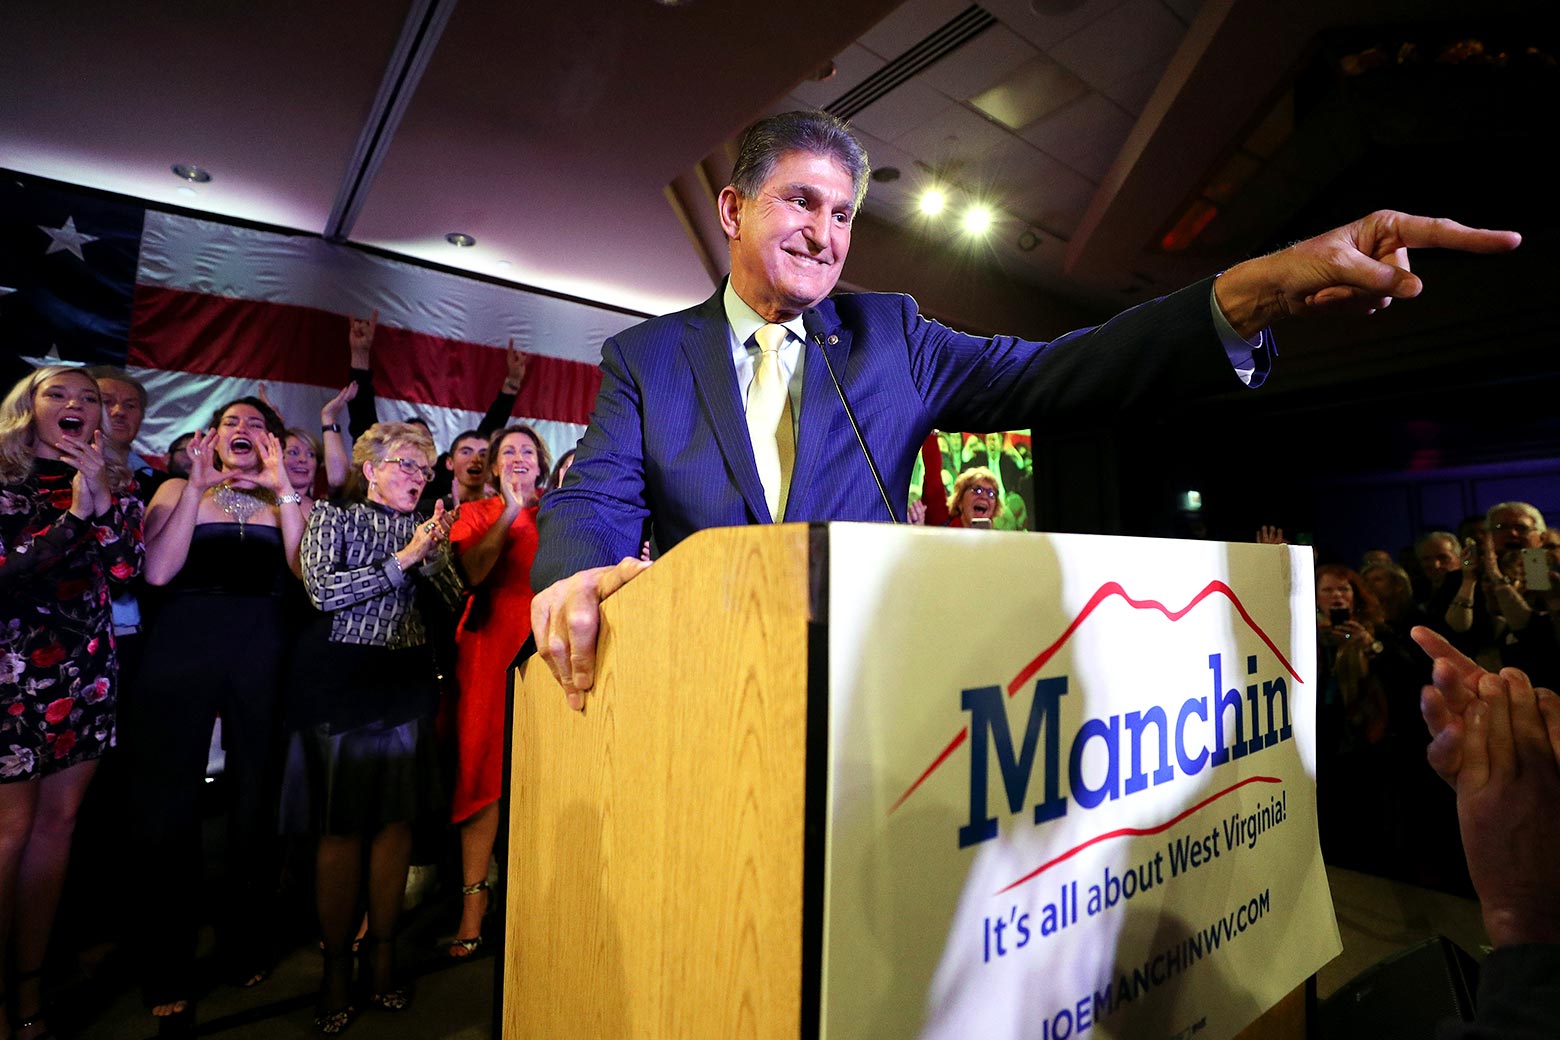 Joe Manchin smiles and points into the crowd as he stands behind a podium that says, "Manchin: It's all about West Virginia."